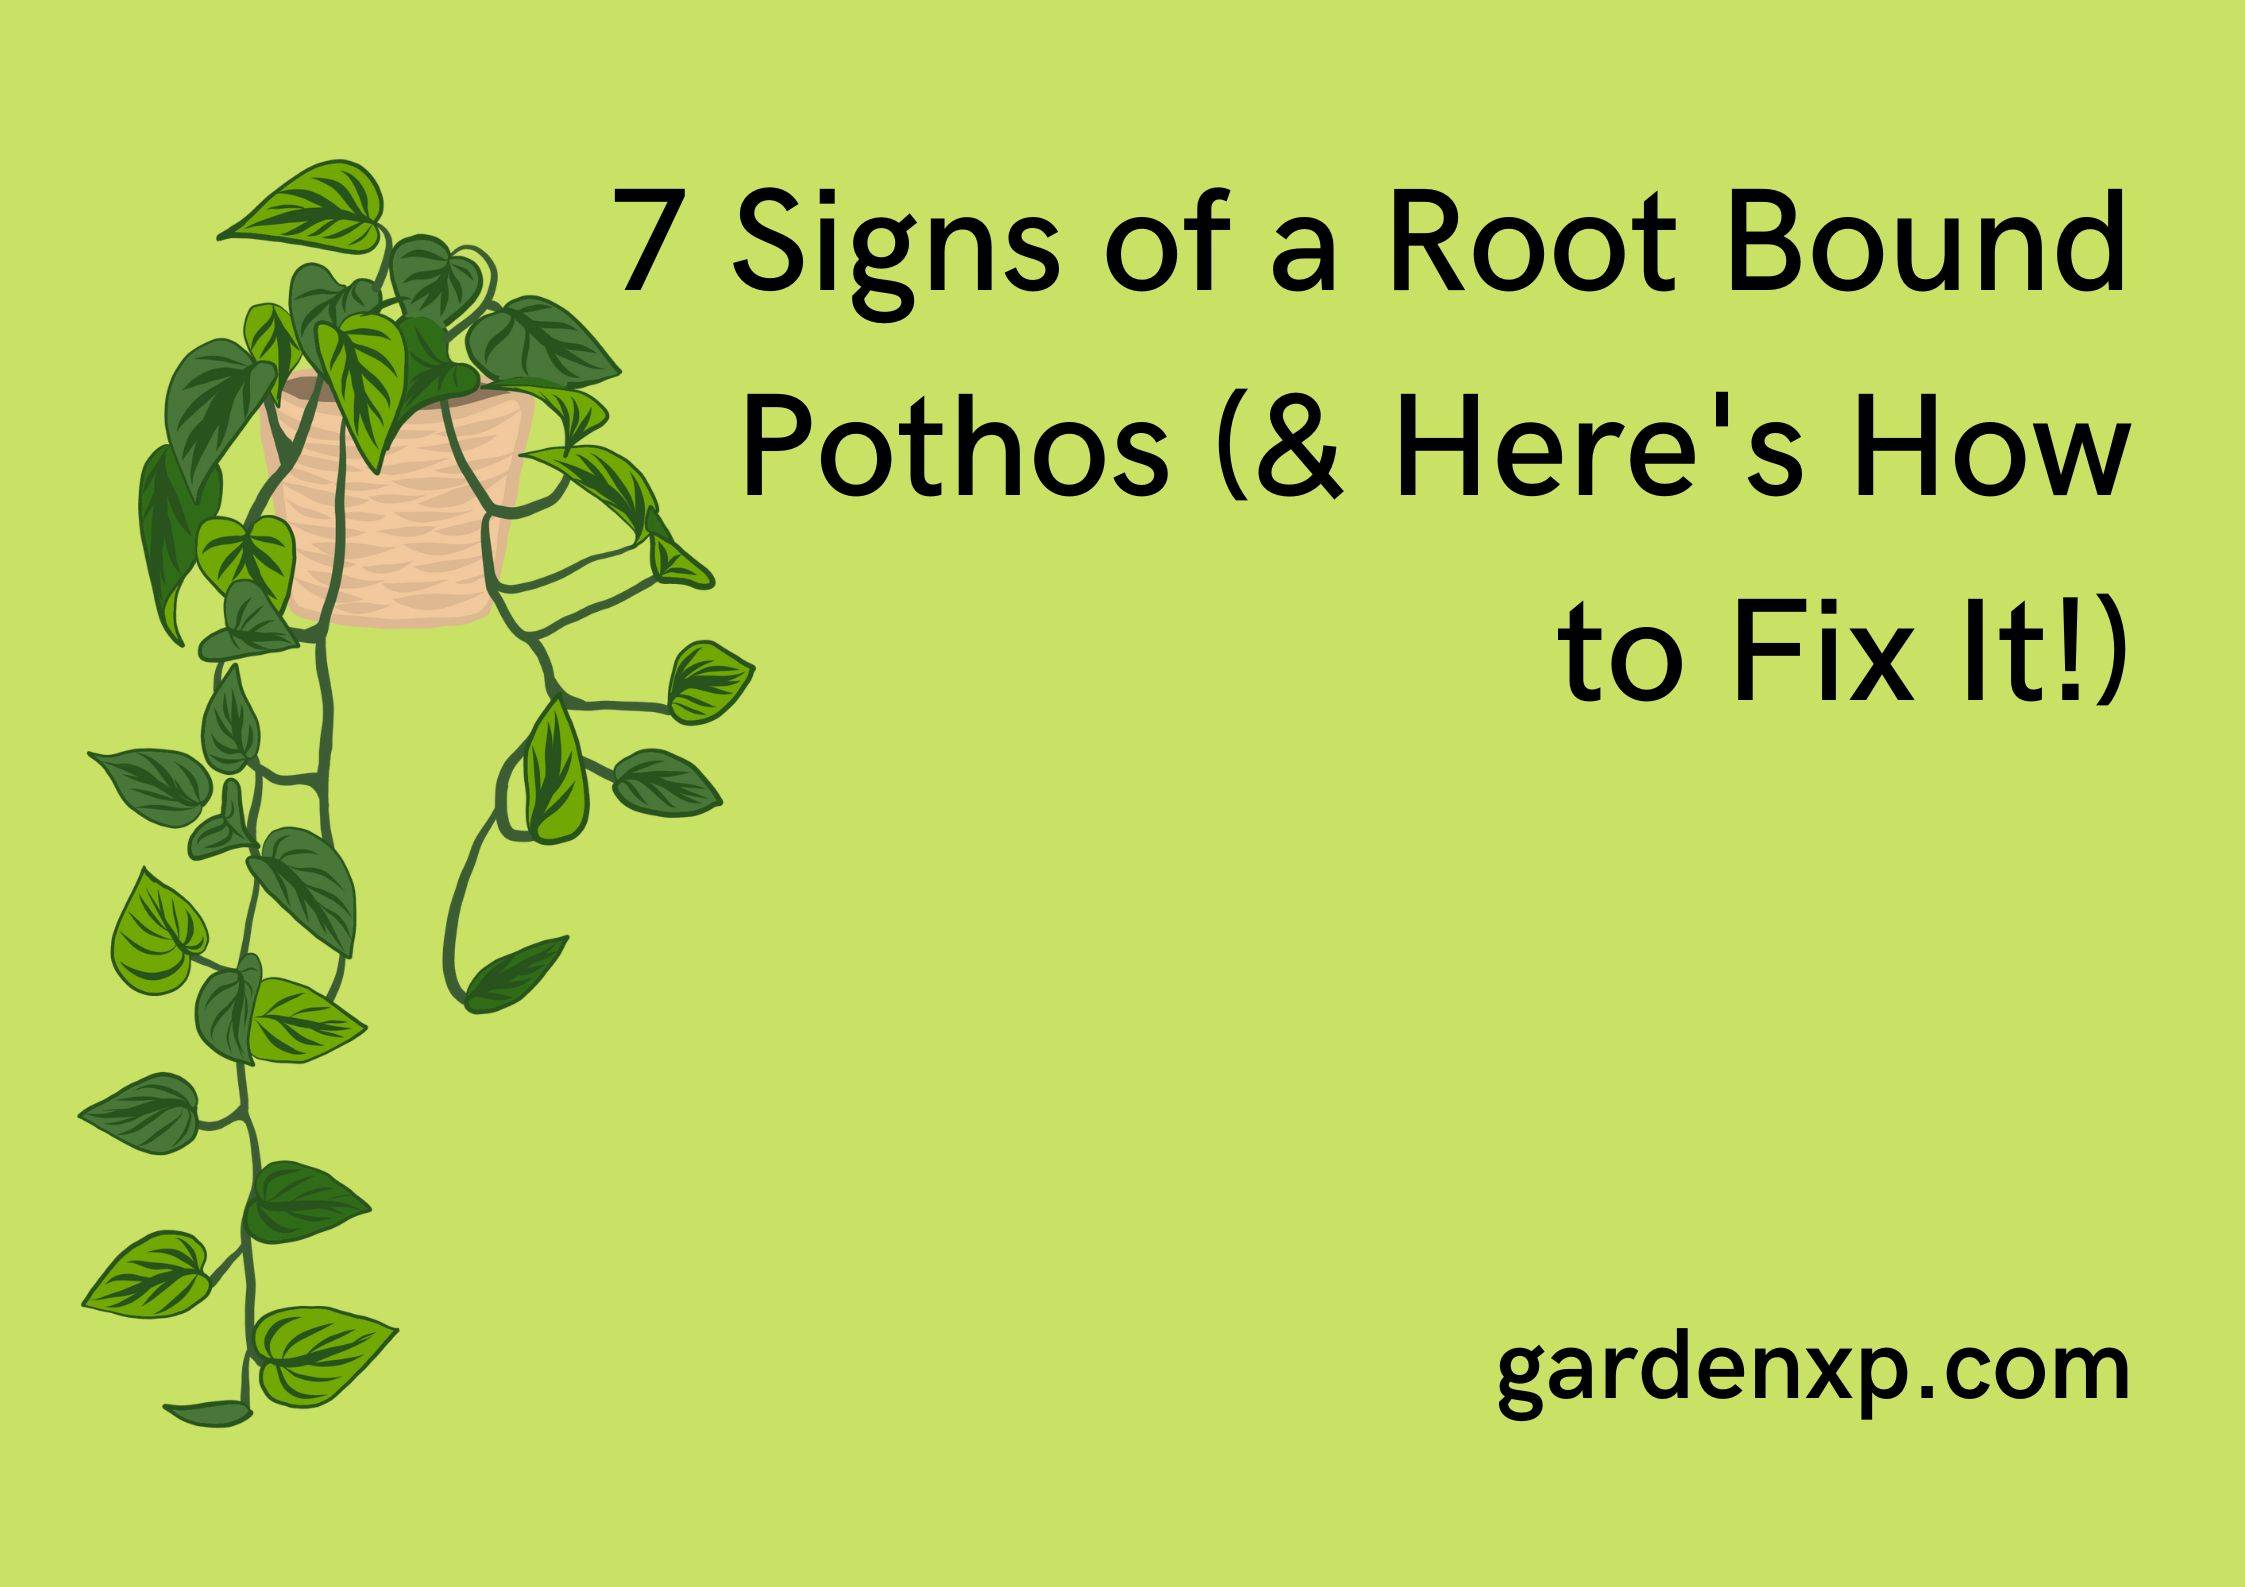 7 Signs of a Root Bound Pothos (& Here's How to Fix It!)